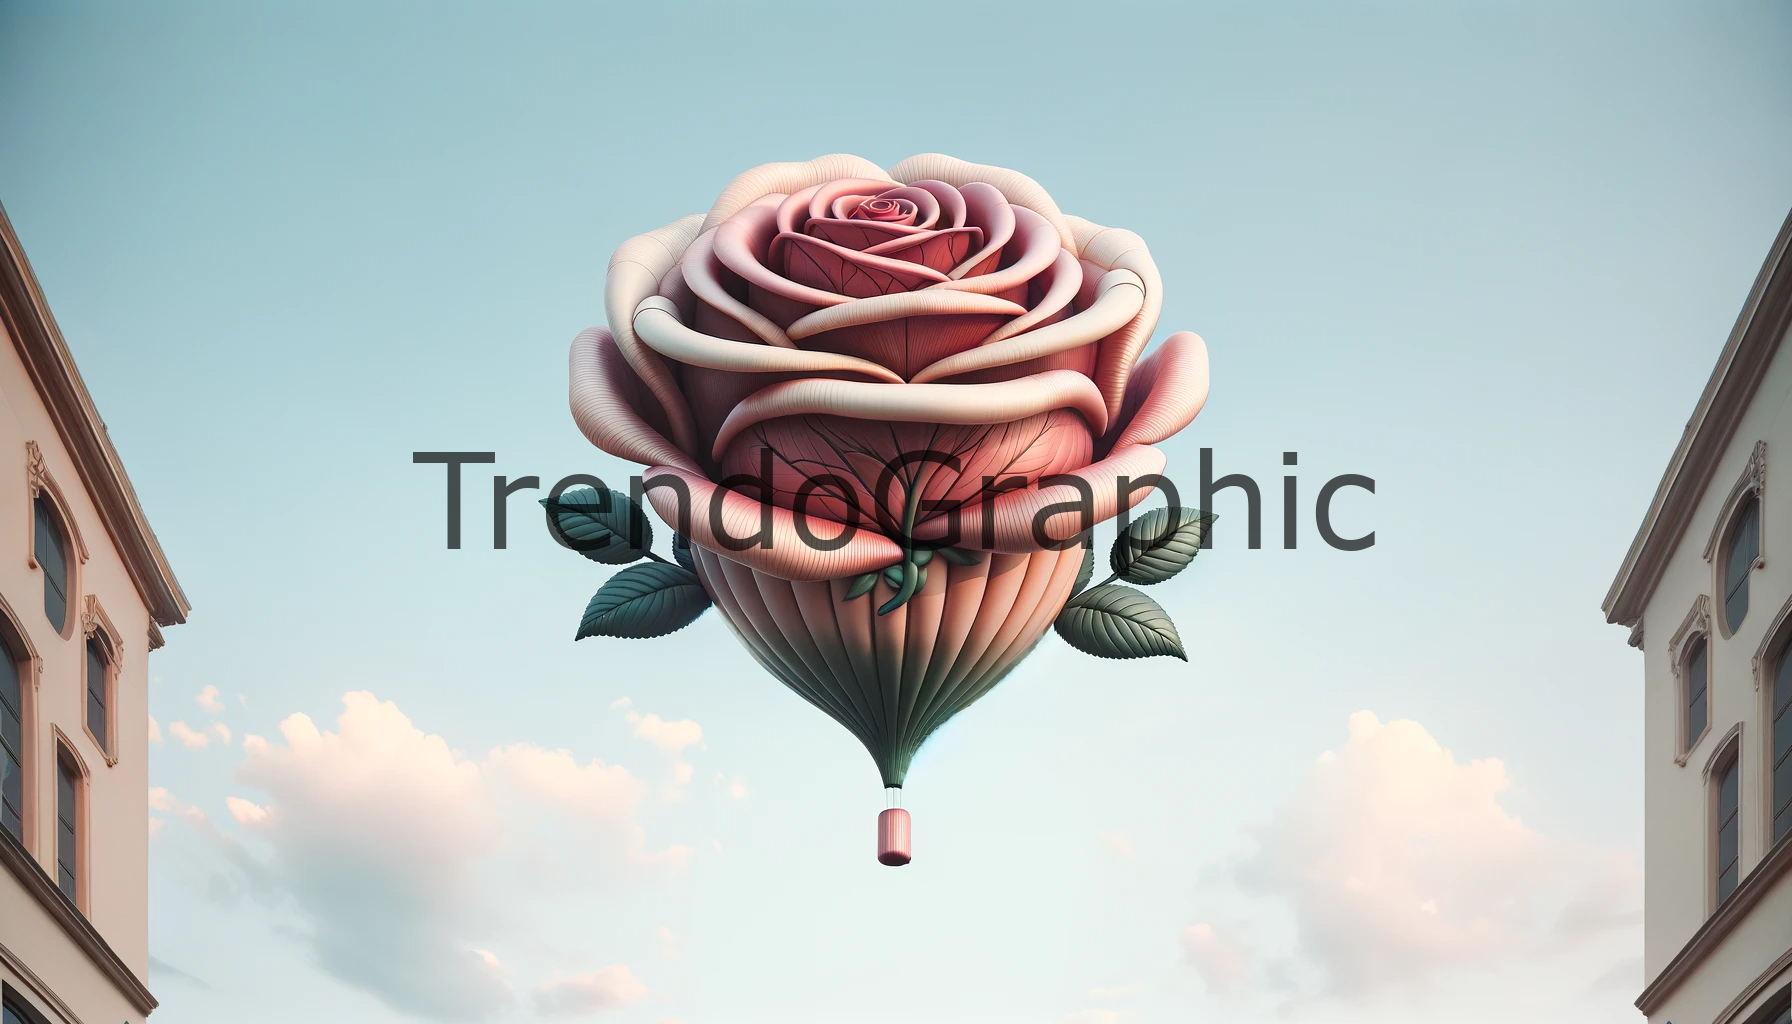 Elevated Elegance: The Rose-Shaped Balloon in the Sky